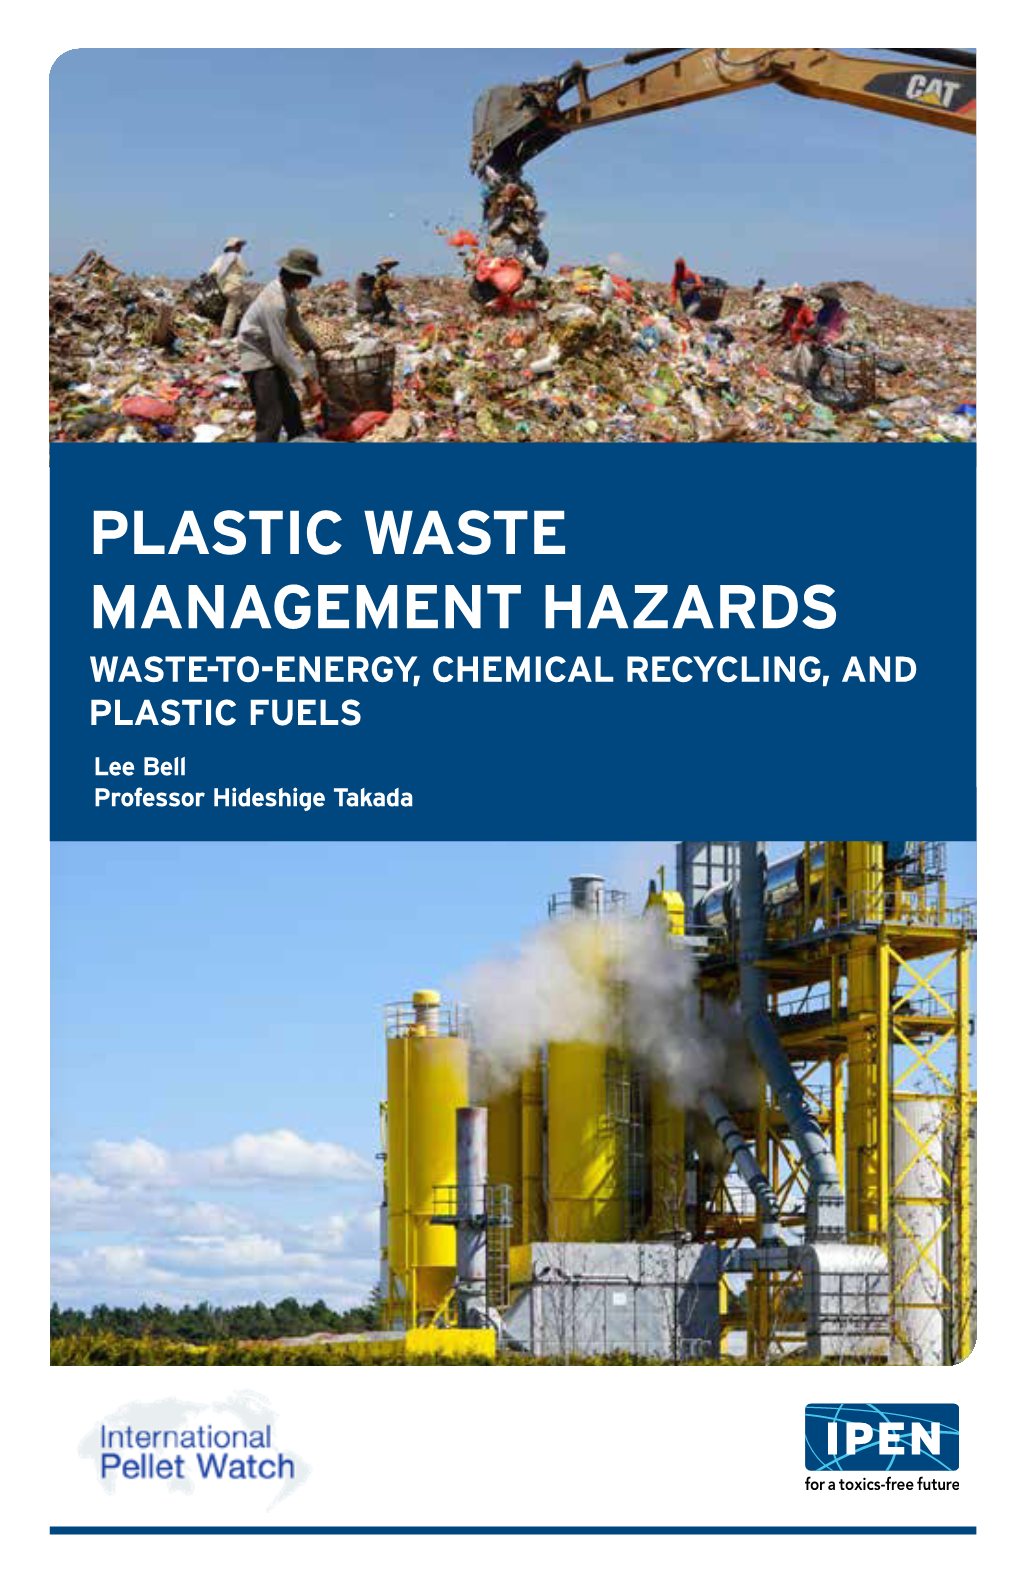 PLASTIC WASTE MANAGEMENT HAZARDS WASTE-TO-ENERGY, CHEMICAL RECYCLING, and PLASTIC FUELS Lee Bell Professor Hideshige Takada